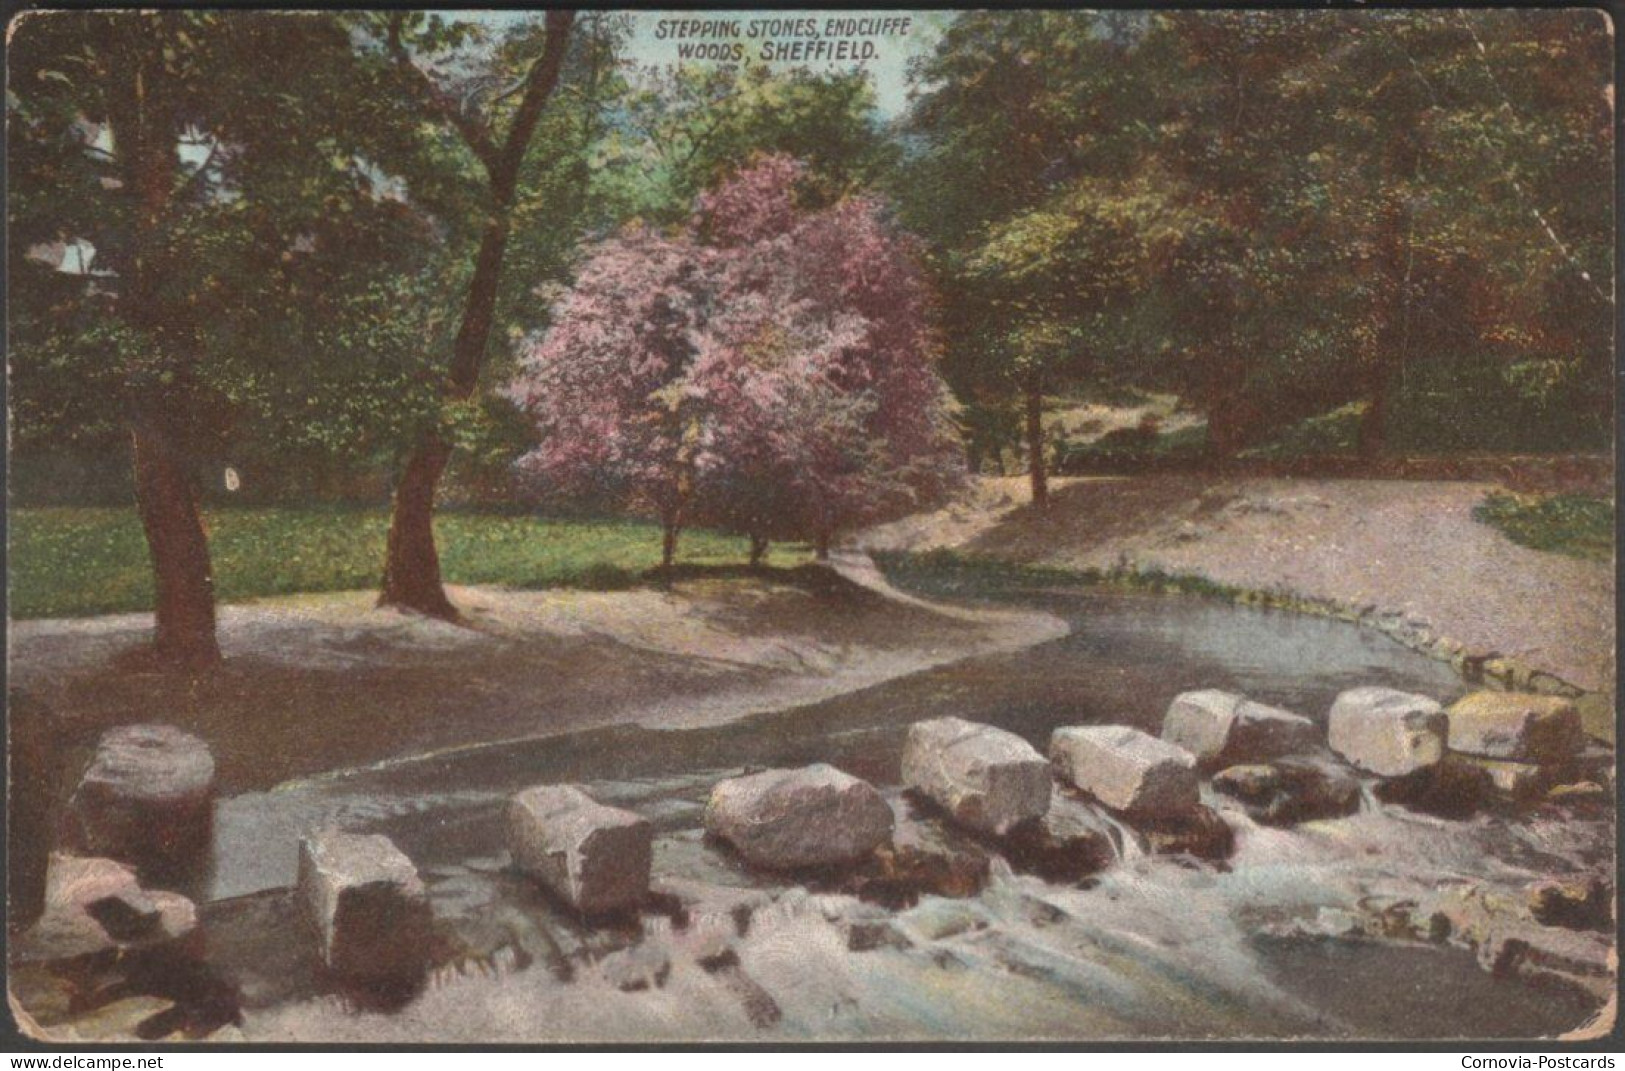 Stepping Stones, Endcliffe Woods, Sheffield, Yorkshire, C.1905 - Postcard - Sheffield